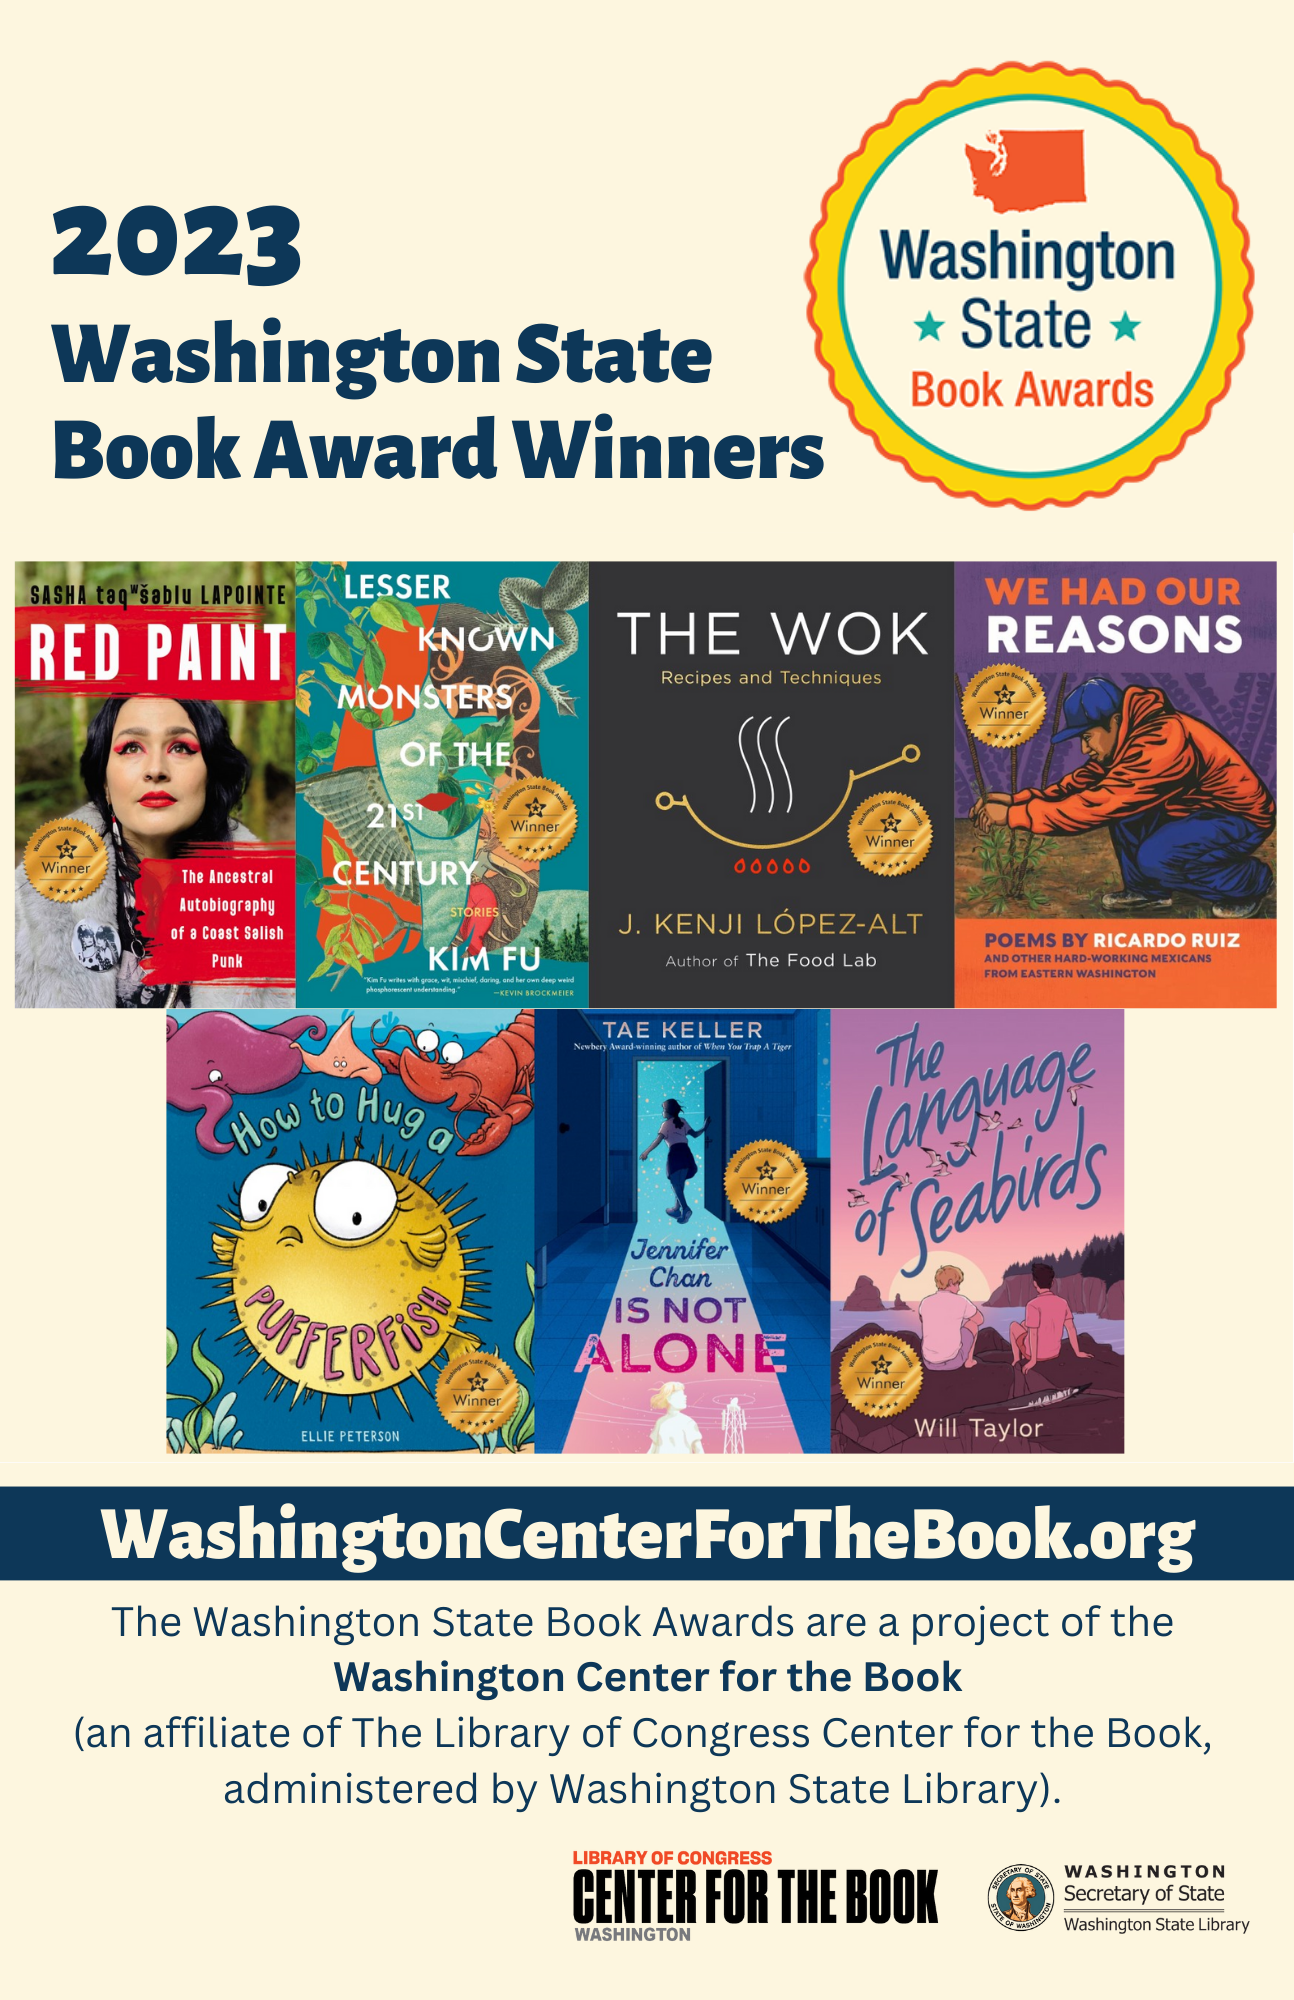 text reads: 2023 Washington State Book Award Winners. Book covers of the 7 winners are shown: Red Paint, Lesser Known Monsters of the 21st Century, The Wok, We Had Our Reasons, How to Hug a Pufferfish, Jennifer Chan Is Not Alone and The Language of Seabirds. WashingtonCenterForTheBook.org The Washington State Book Awards are a project of the Washington Center for the Book (an affiliate of The Library of Congress Center for the Book, administered by Washington State Library).